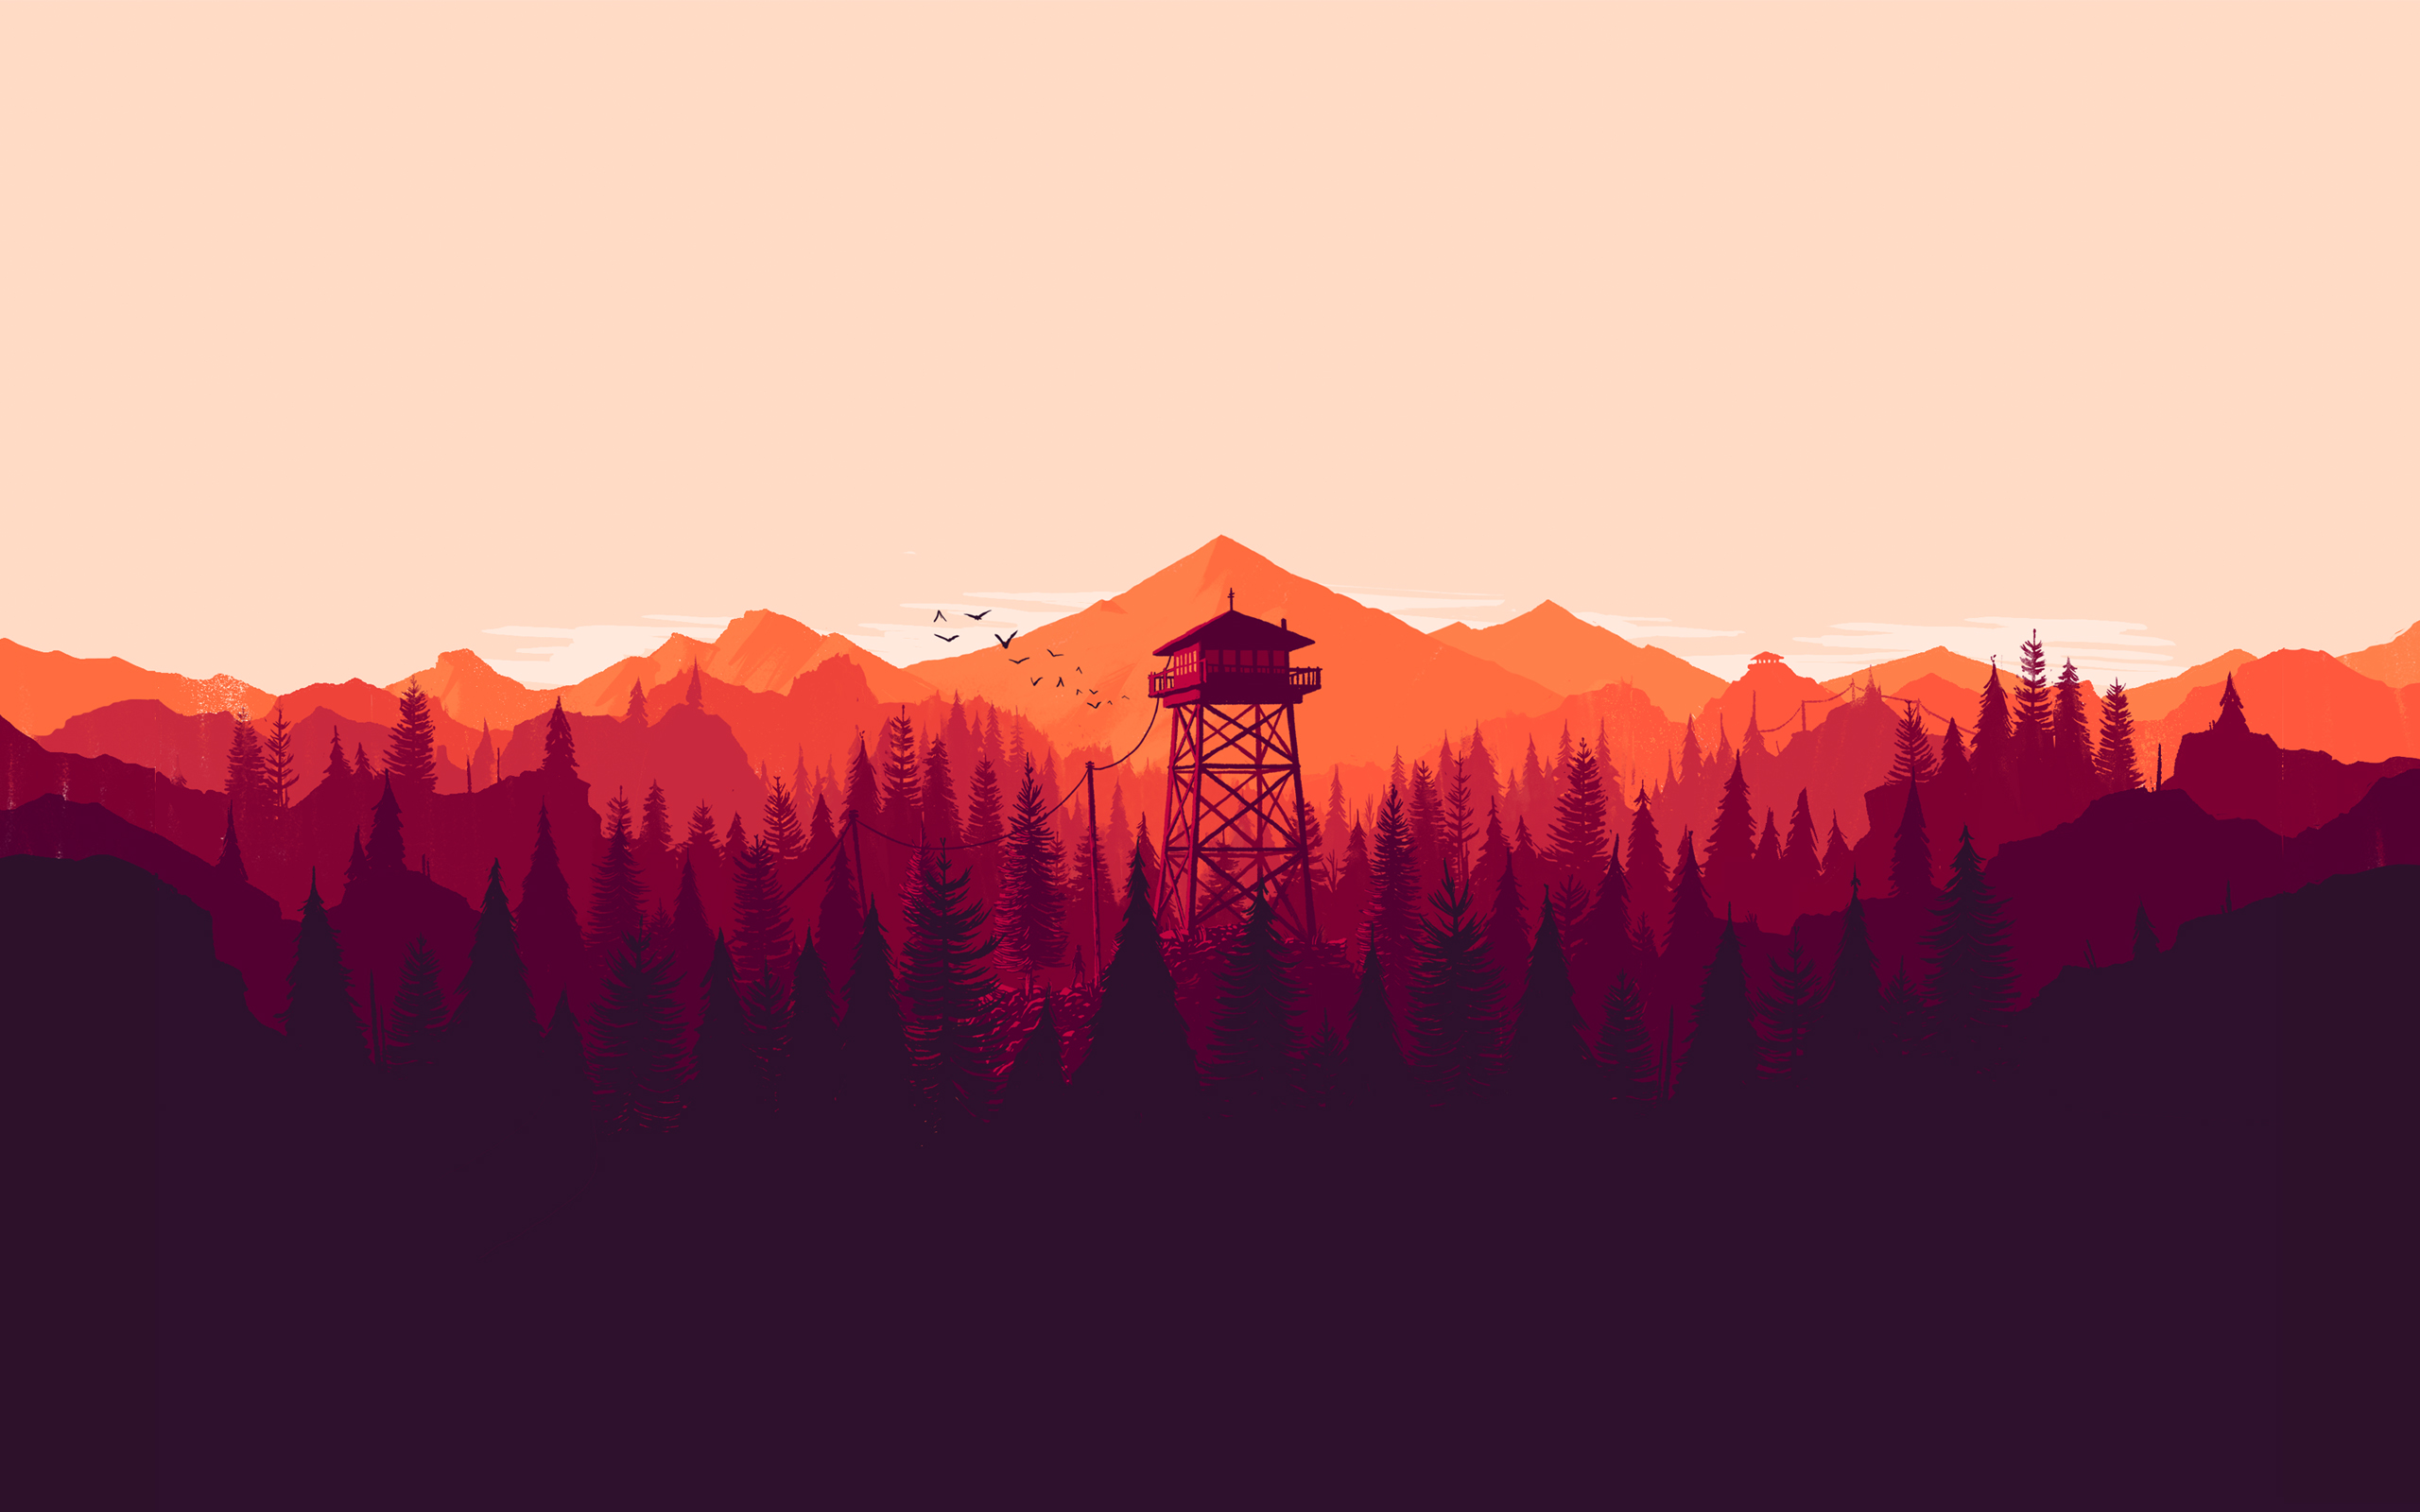 Campo Santo, Video Games, Watching Tower, Mountain, Minimalism, Hunting